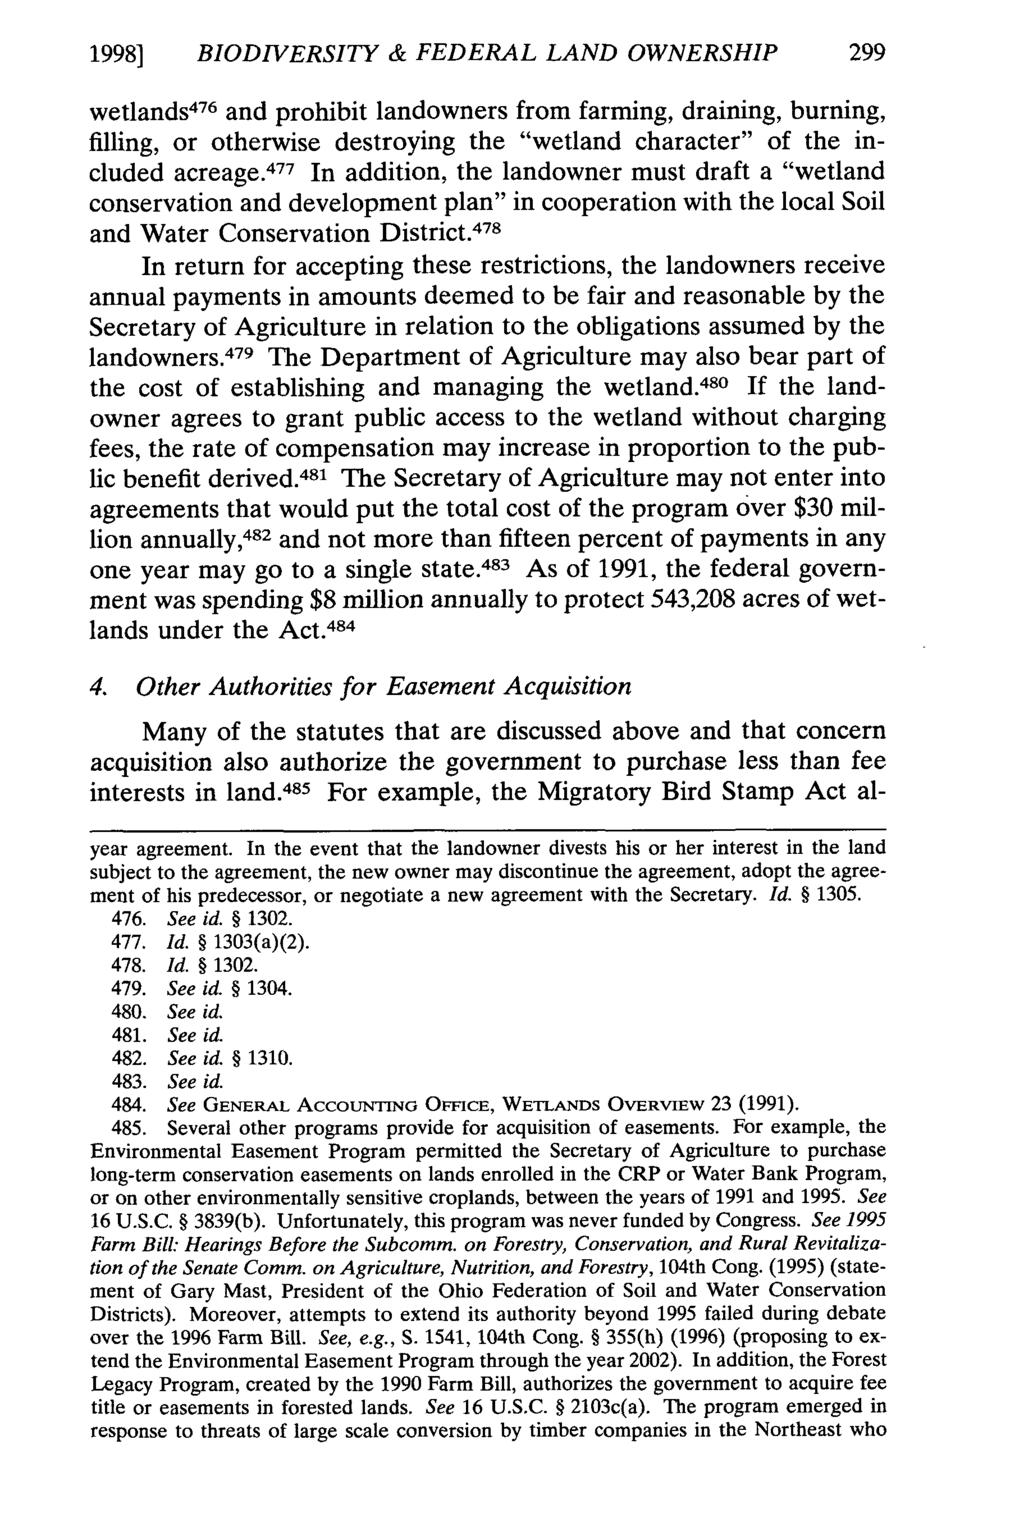 1998] BIODIVERSITY & FEDERAL LAND OWNERSHIP wetlands 476 and prohibit landowners from farming, draining, burning, filling, or otherwise destroying the "wetland character" of the included acreage.